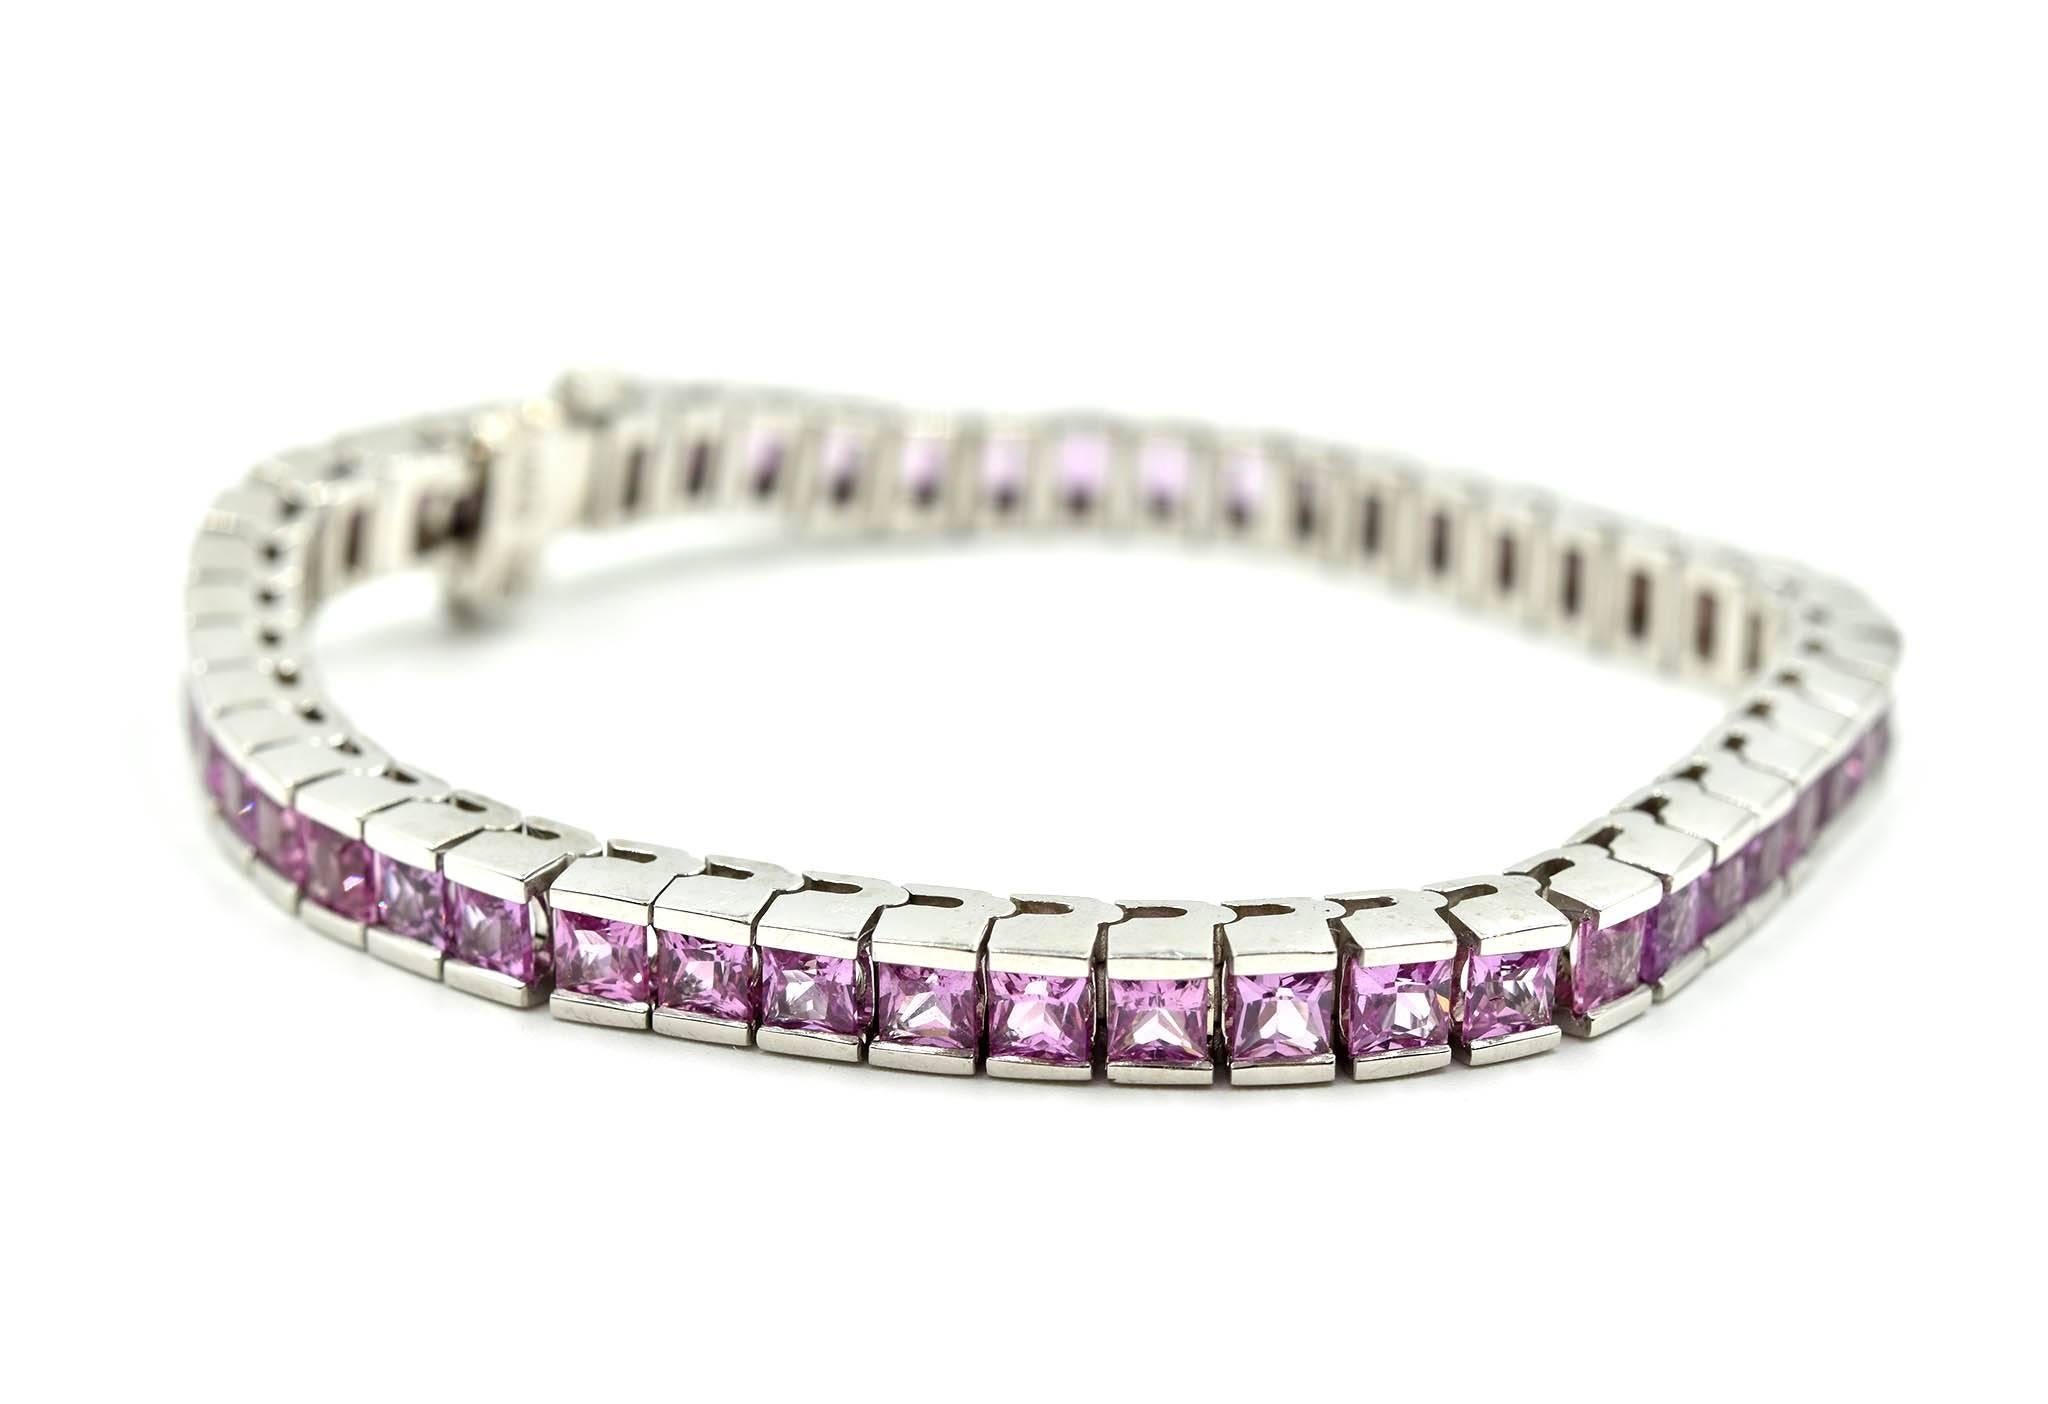 Designer: custom design
Material: 14k white gold
Pink Sapphires: 49 square cuts = 13.36 carat total weight
Dimensions: bracelet is 7 inches long
Weight: 28.20 grams
